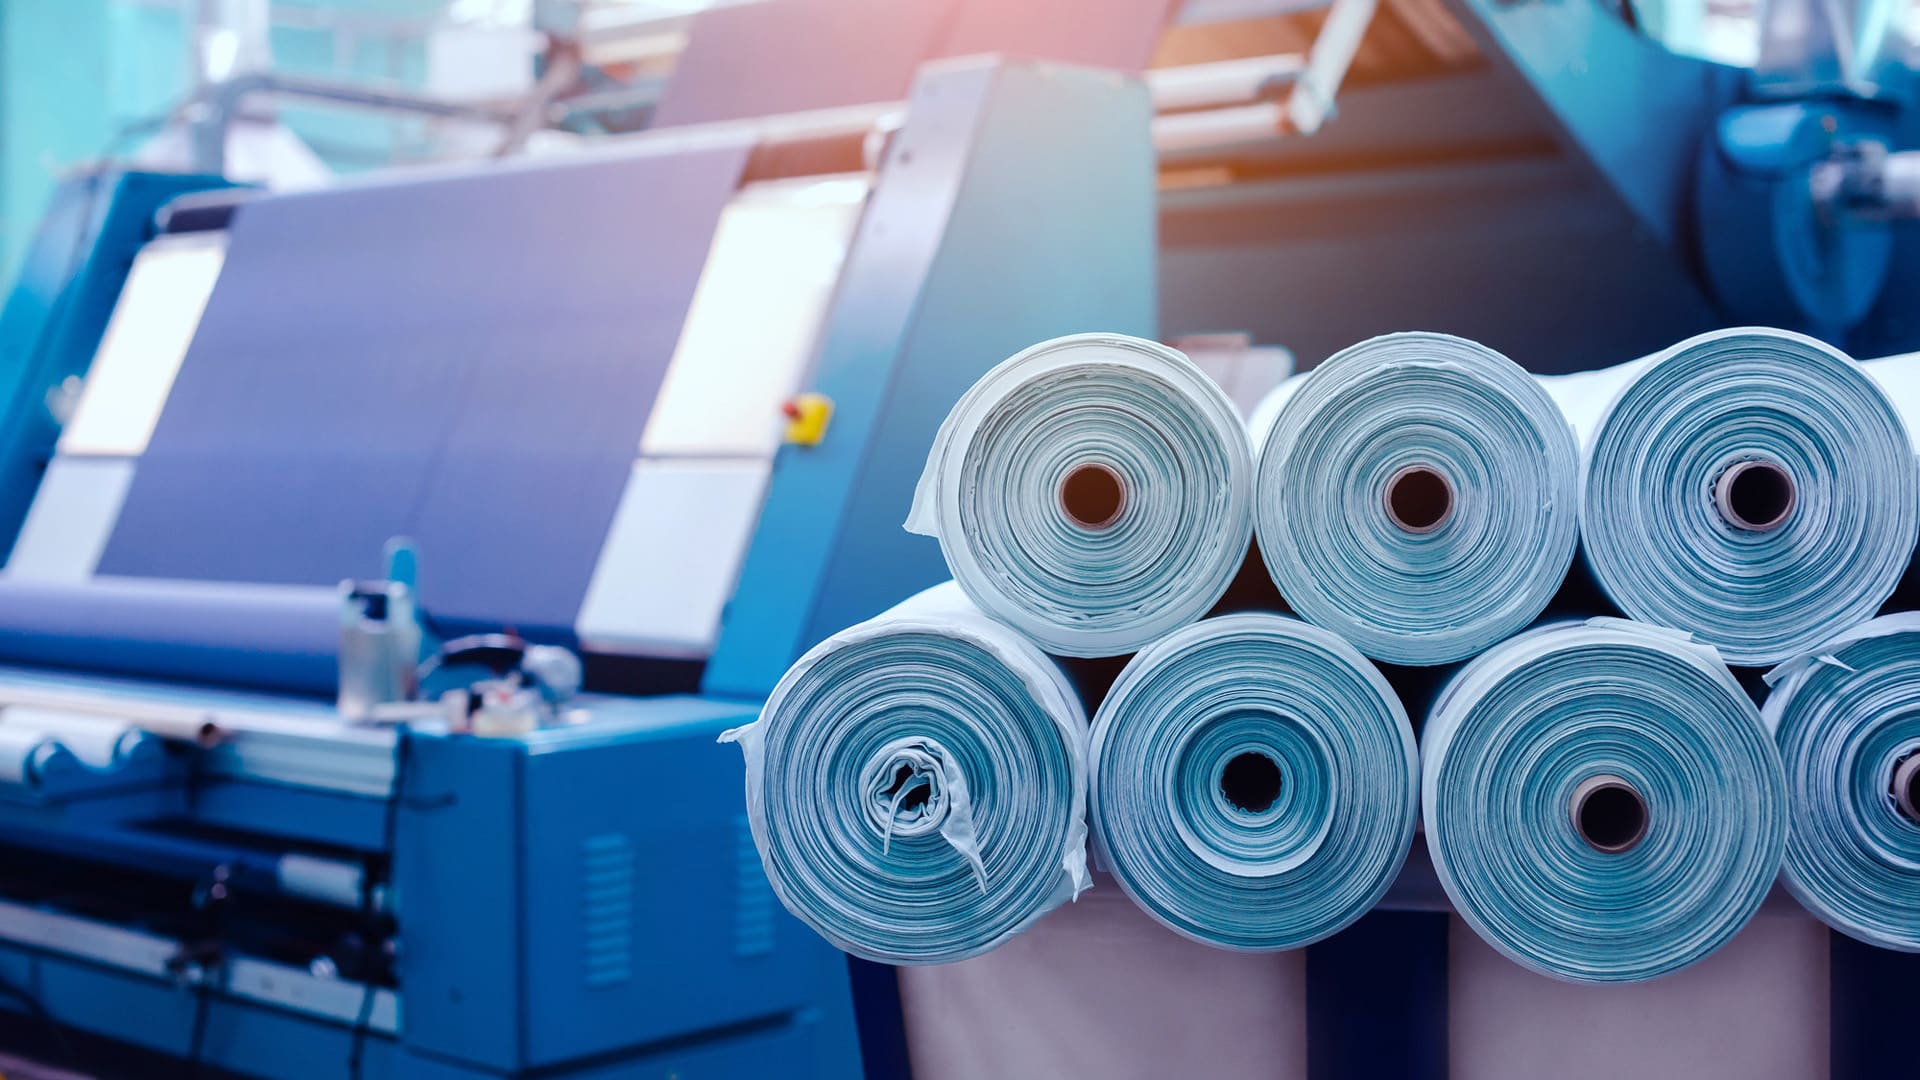 PLI scheme for textiles attracts Rs 1,536 cr in investments: Govt